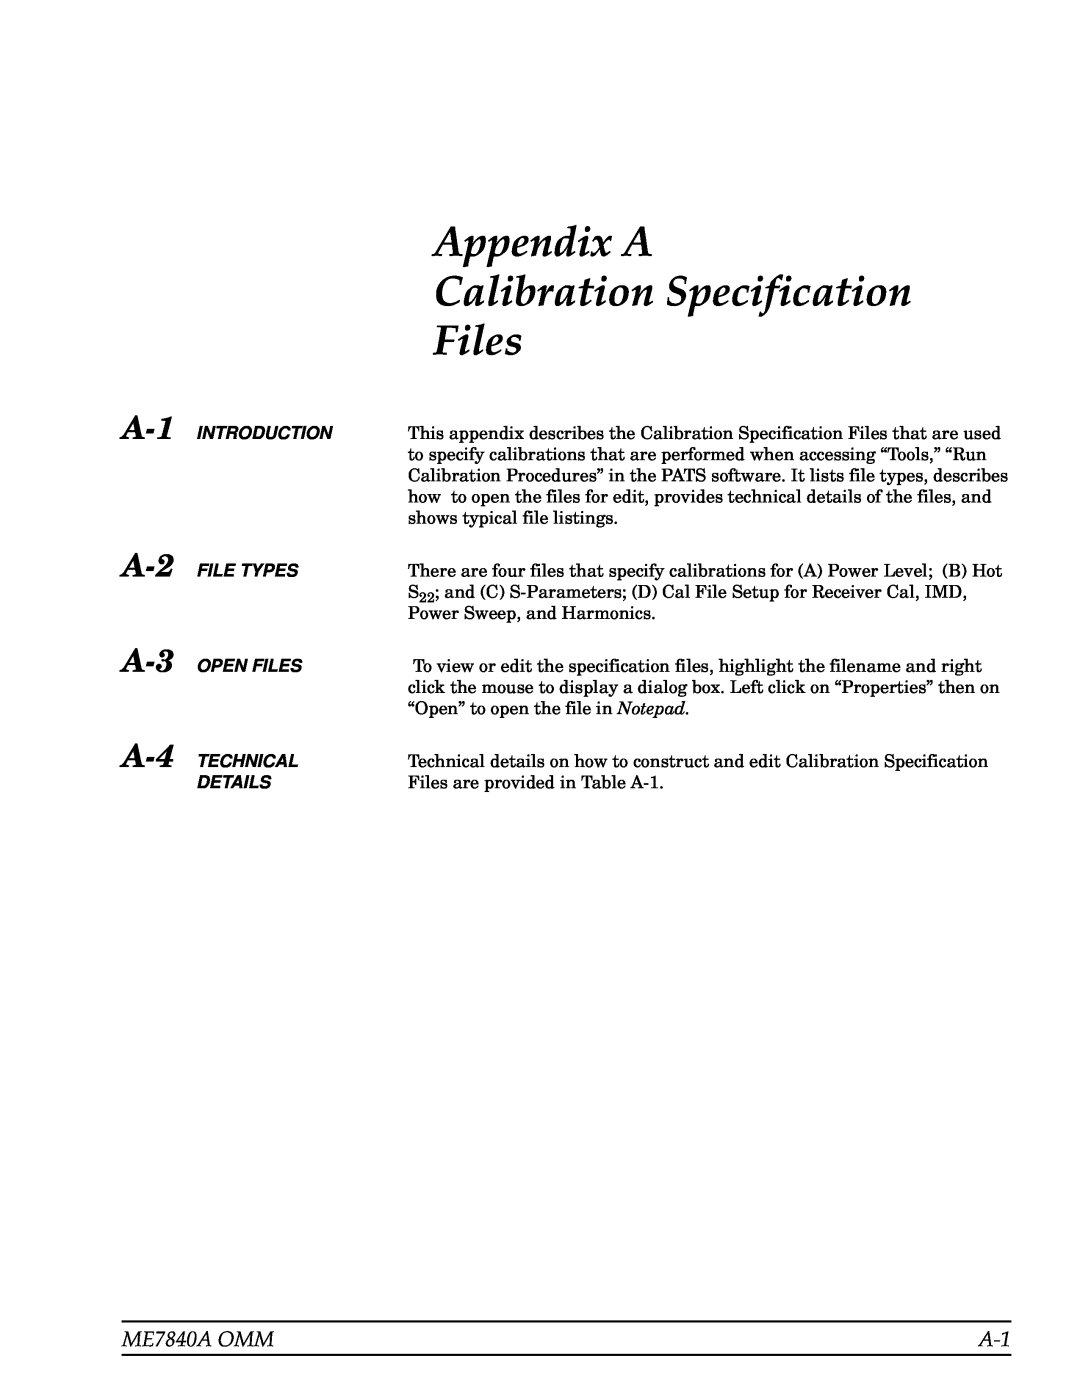 Anritsu manual Appendix A, Calibration Specification, ME7840A OMM, Introduction, File Types, Open Files, Technical 